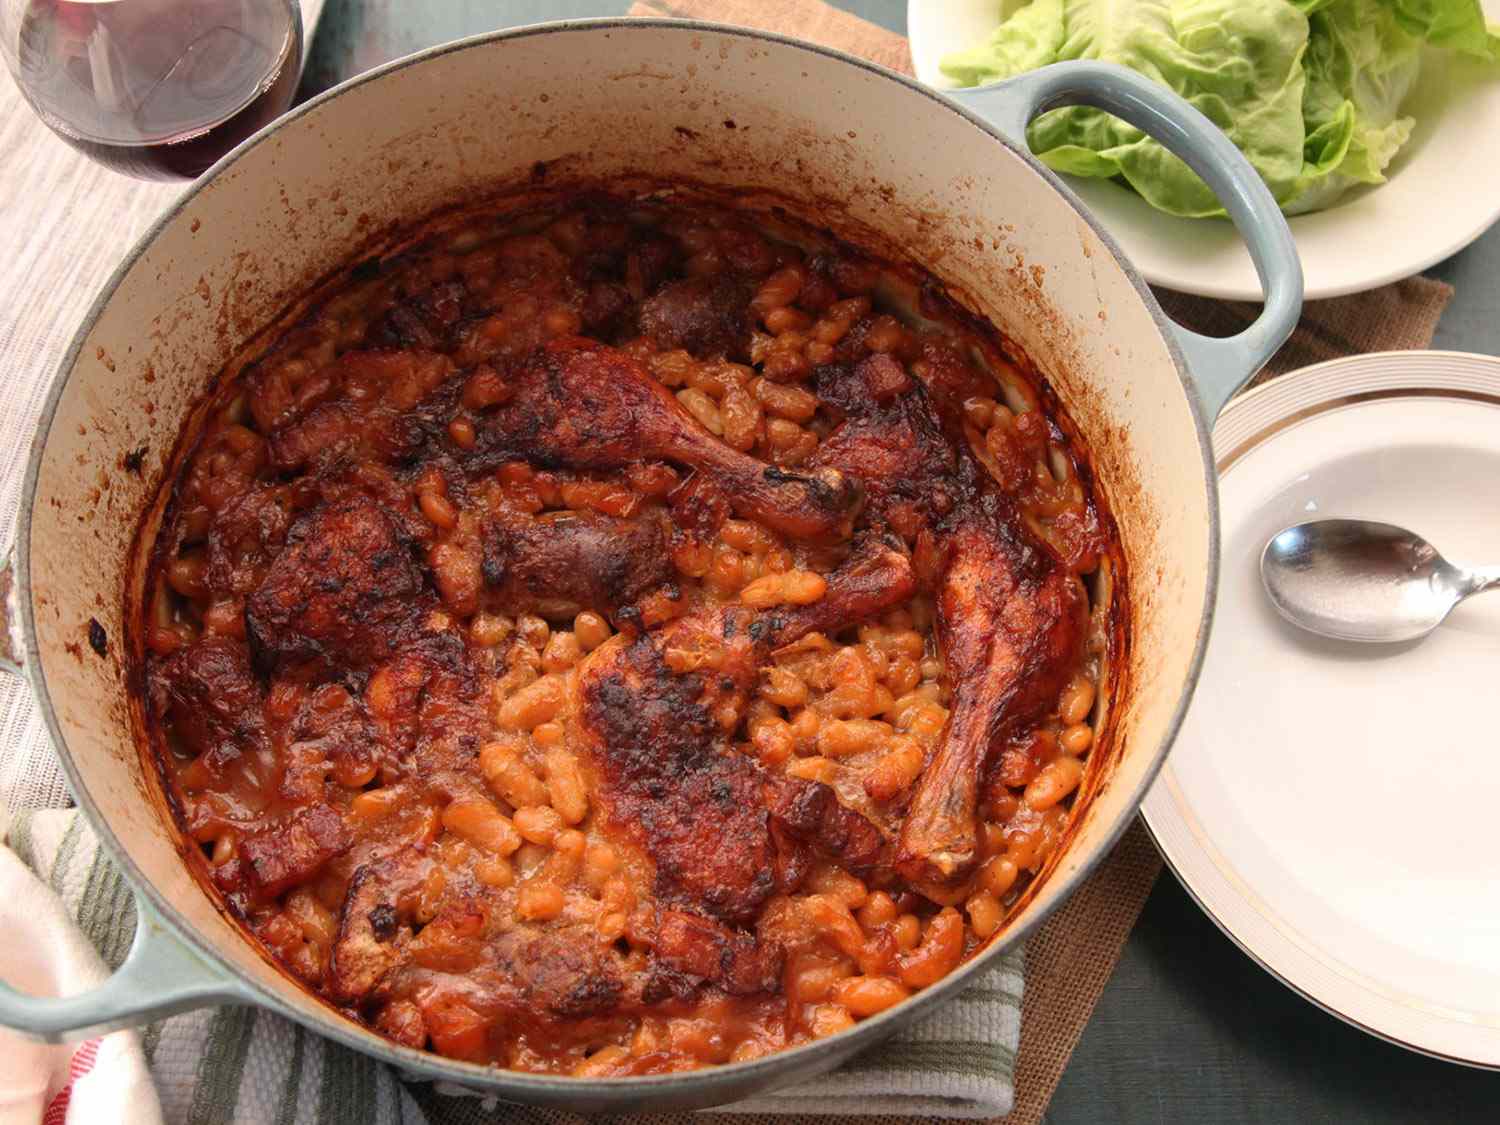 A baked cassoulet in a Dutch oven with a dry texture and crust formed by the beans and meat.